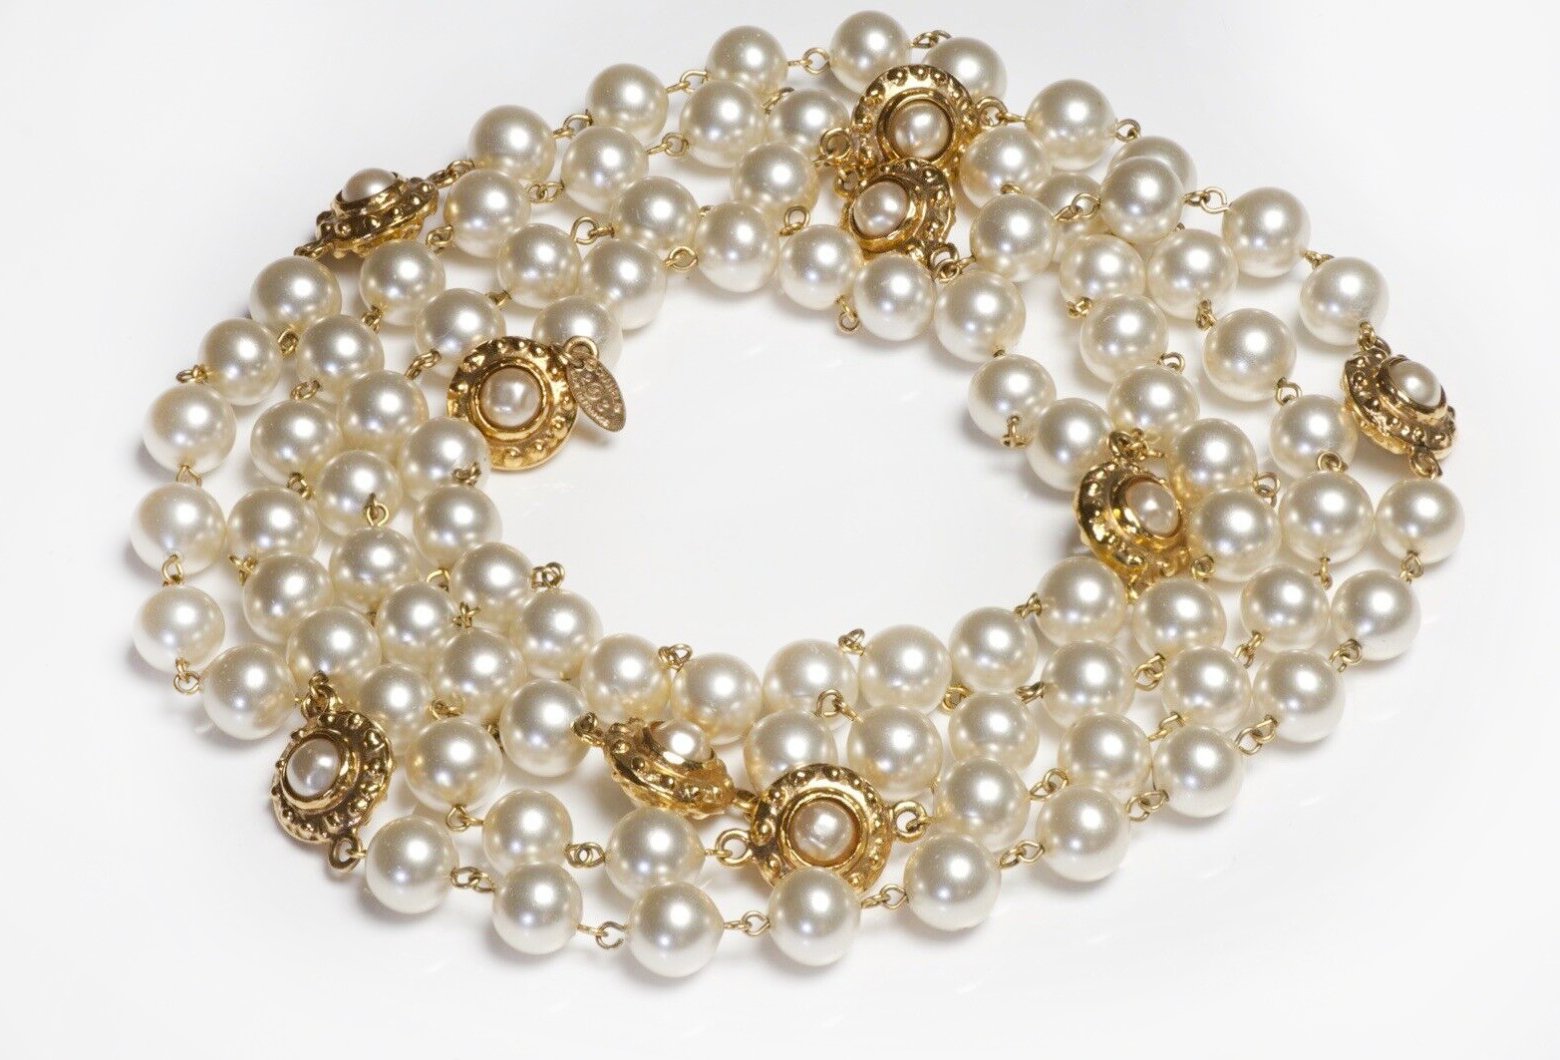 CHANEL Paris 1980’s Byzantine Style Extra Long Pearl Sautoir Necklace - DSF Antique Jewelry